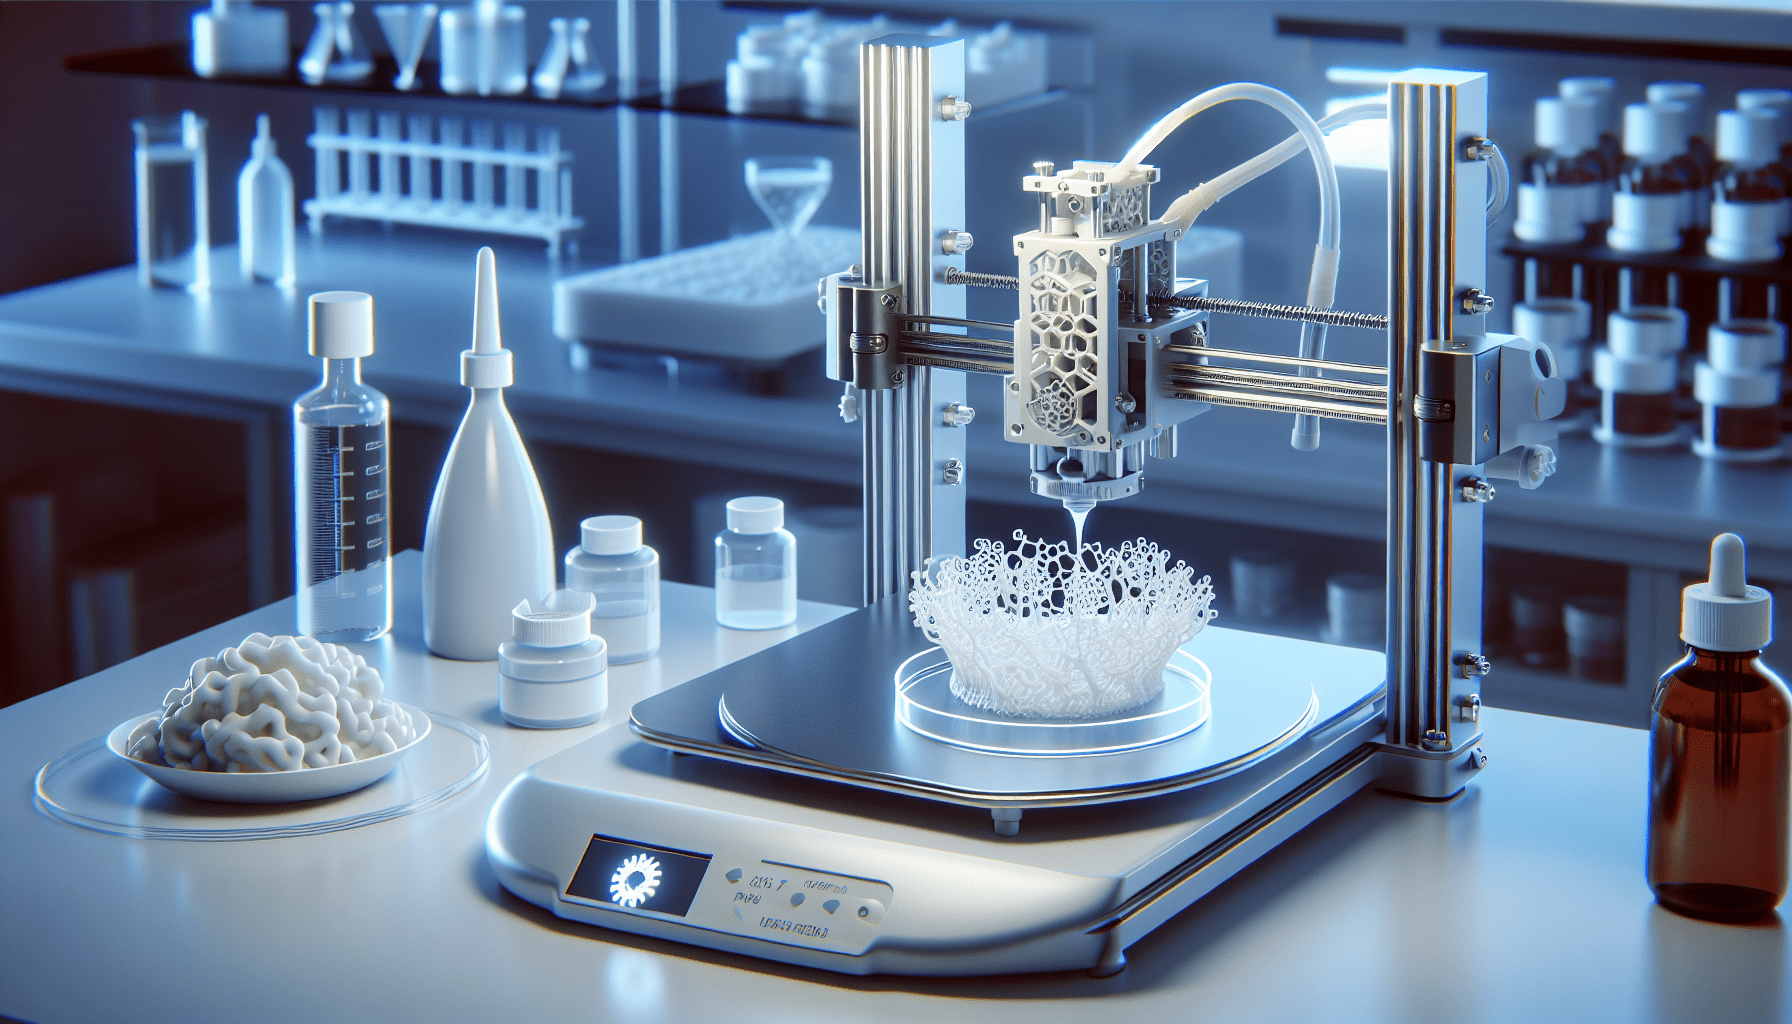 ronawk-partners-with-b9creations-to-innovate-3d-bioprinting-with-bio-blocks Ronawk Partners with B9Creations to Innovate 3D Bioprinting with Bio-Blocks